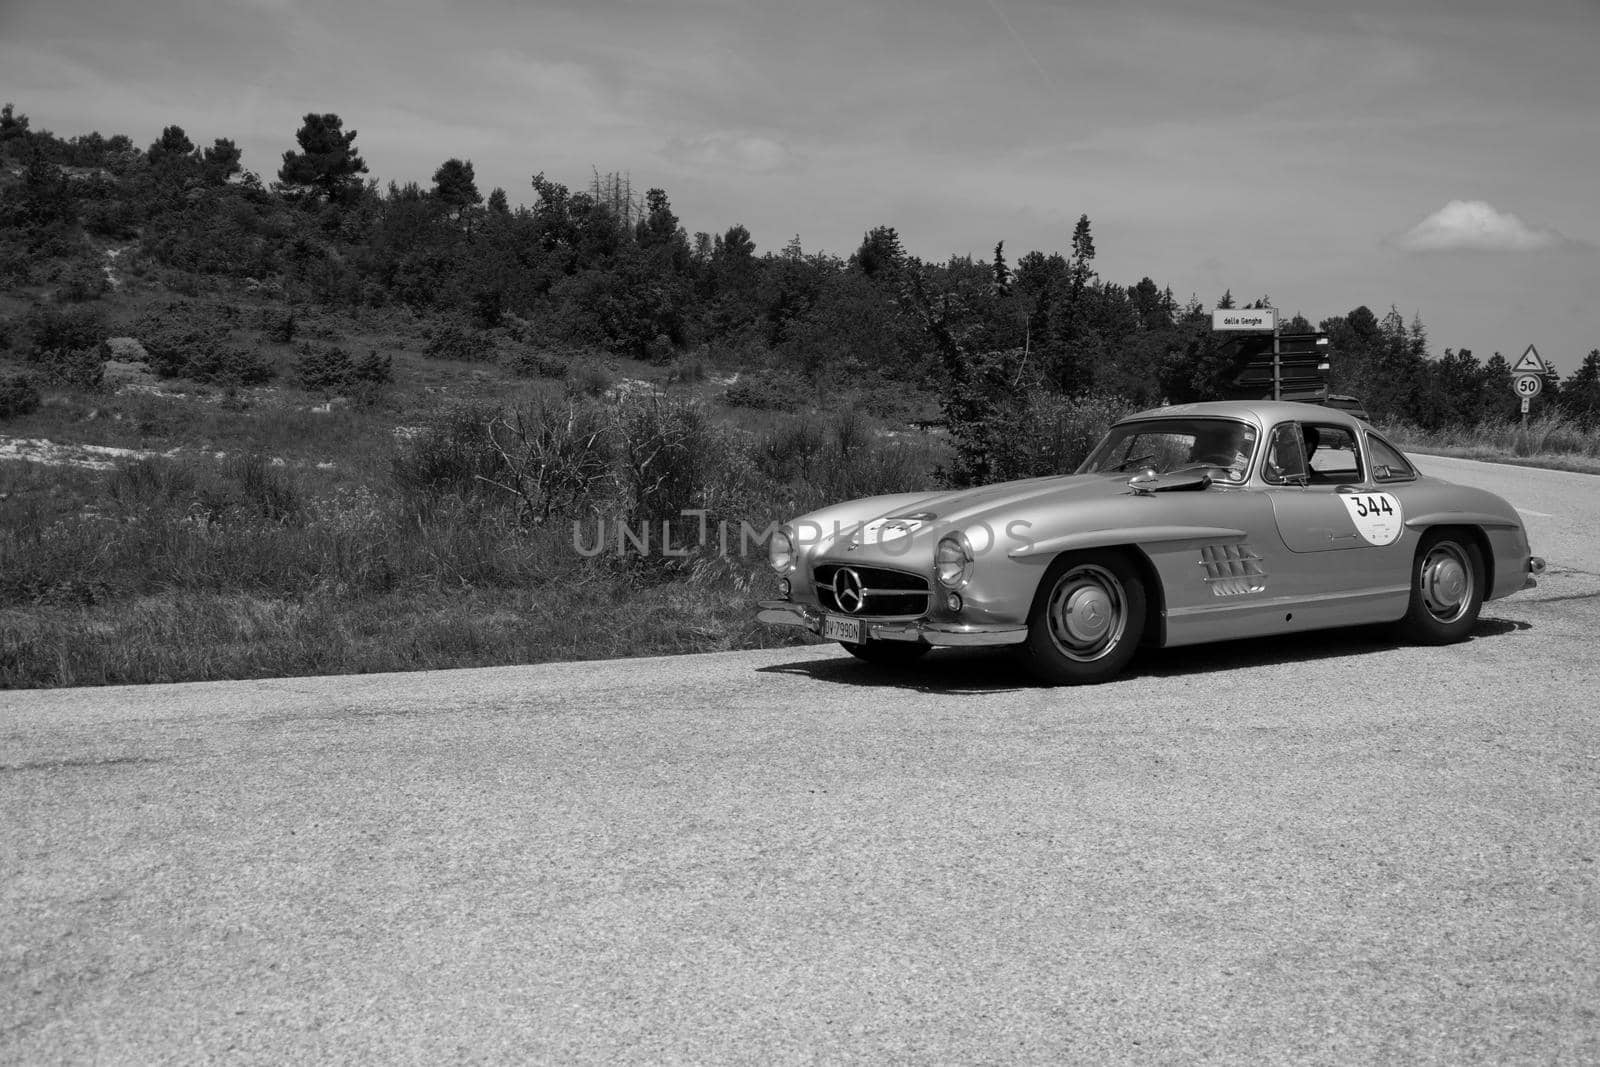 MERCEDES-BENZ 300 SL (W198) 1954 on an old racing car in rally Mille Miglia 2022 the famous italian historical race (1927-1957 by massimocampanari